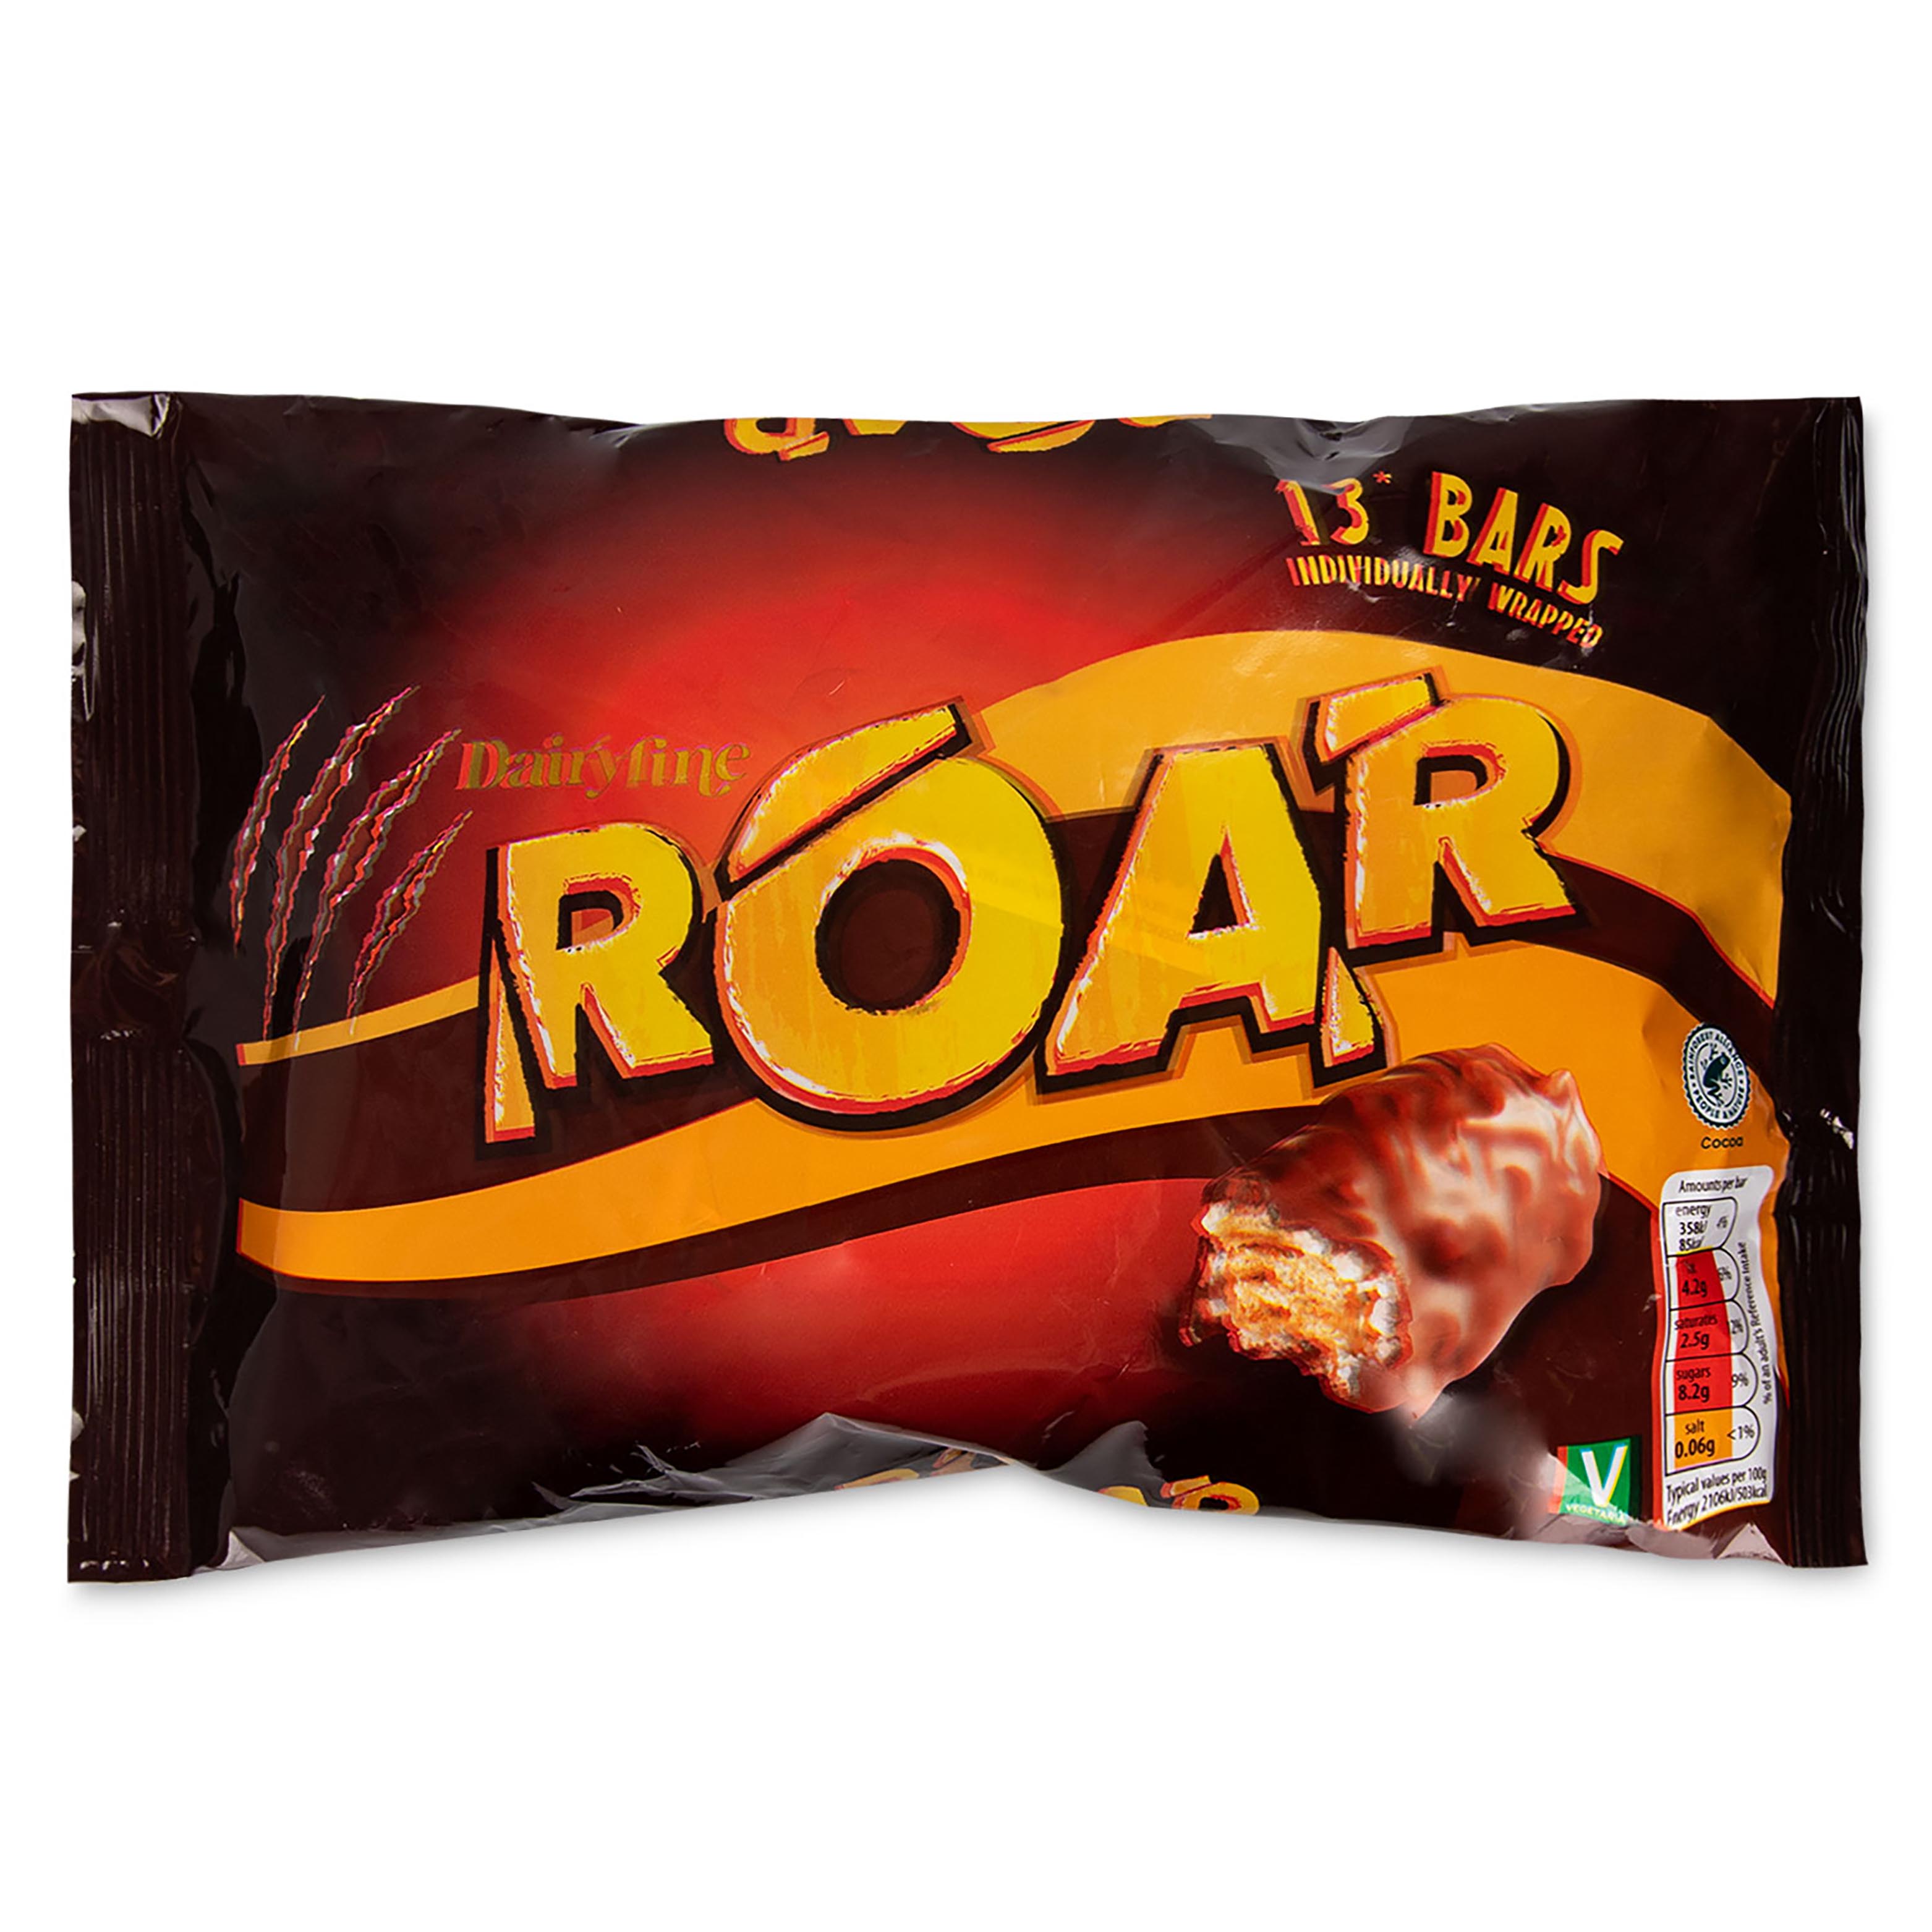 Aldi's dupe of the Lion bar has been scanning at the till for the fraction of the original's price